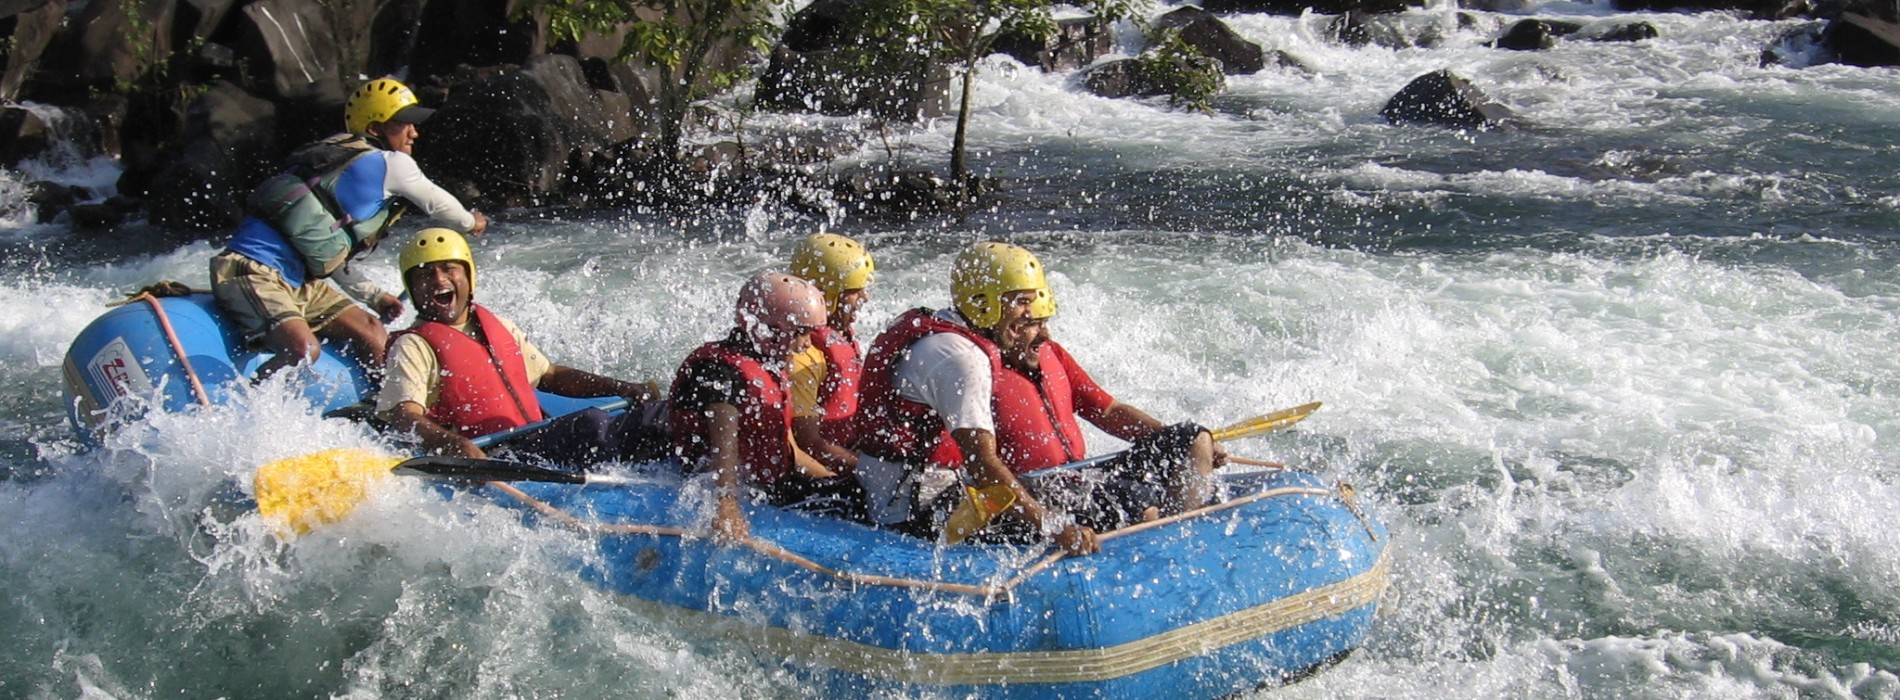 GTDC to offer white water rafting activity from today